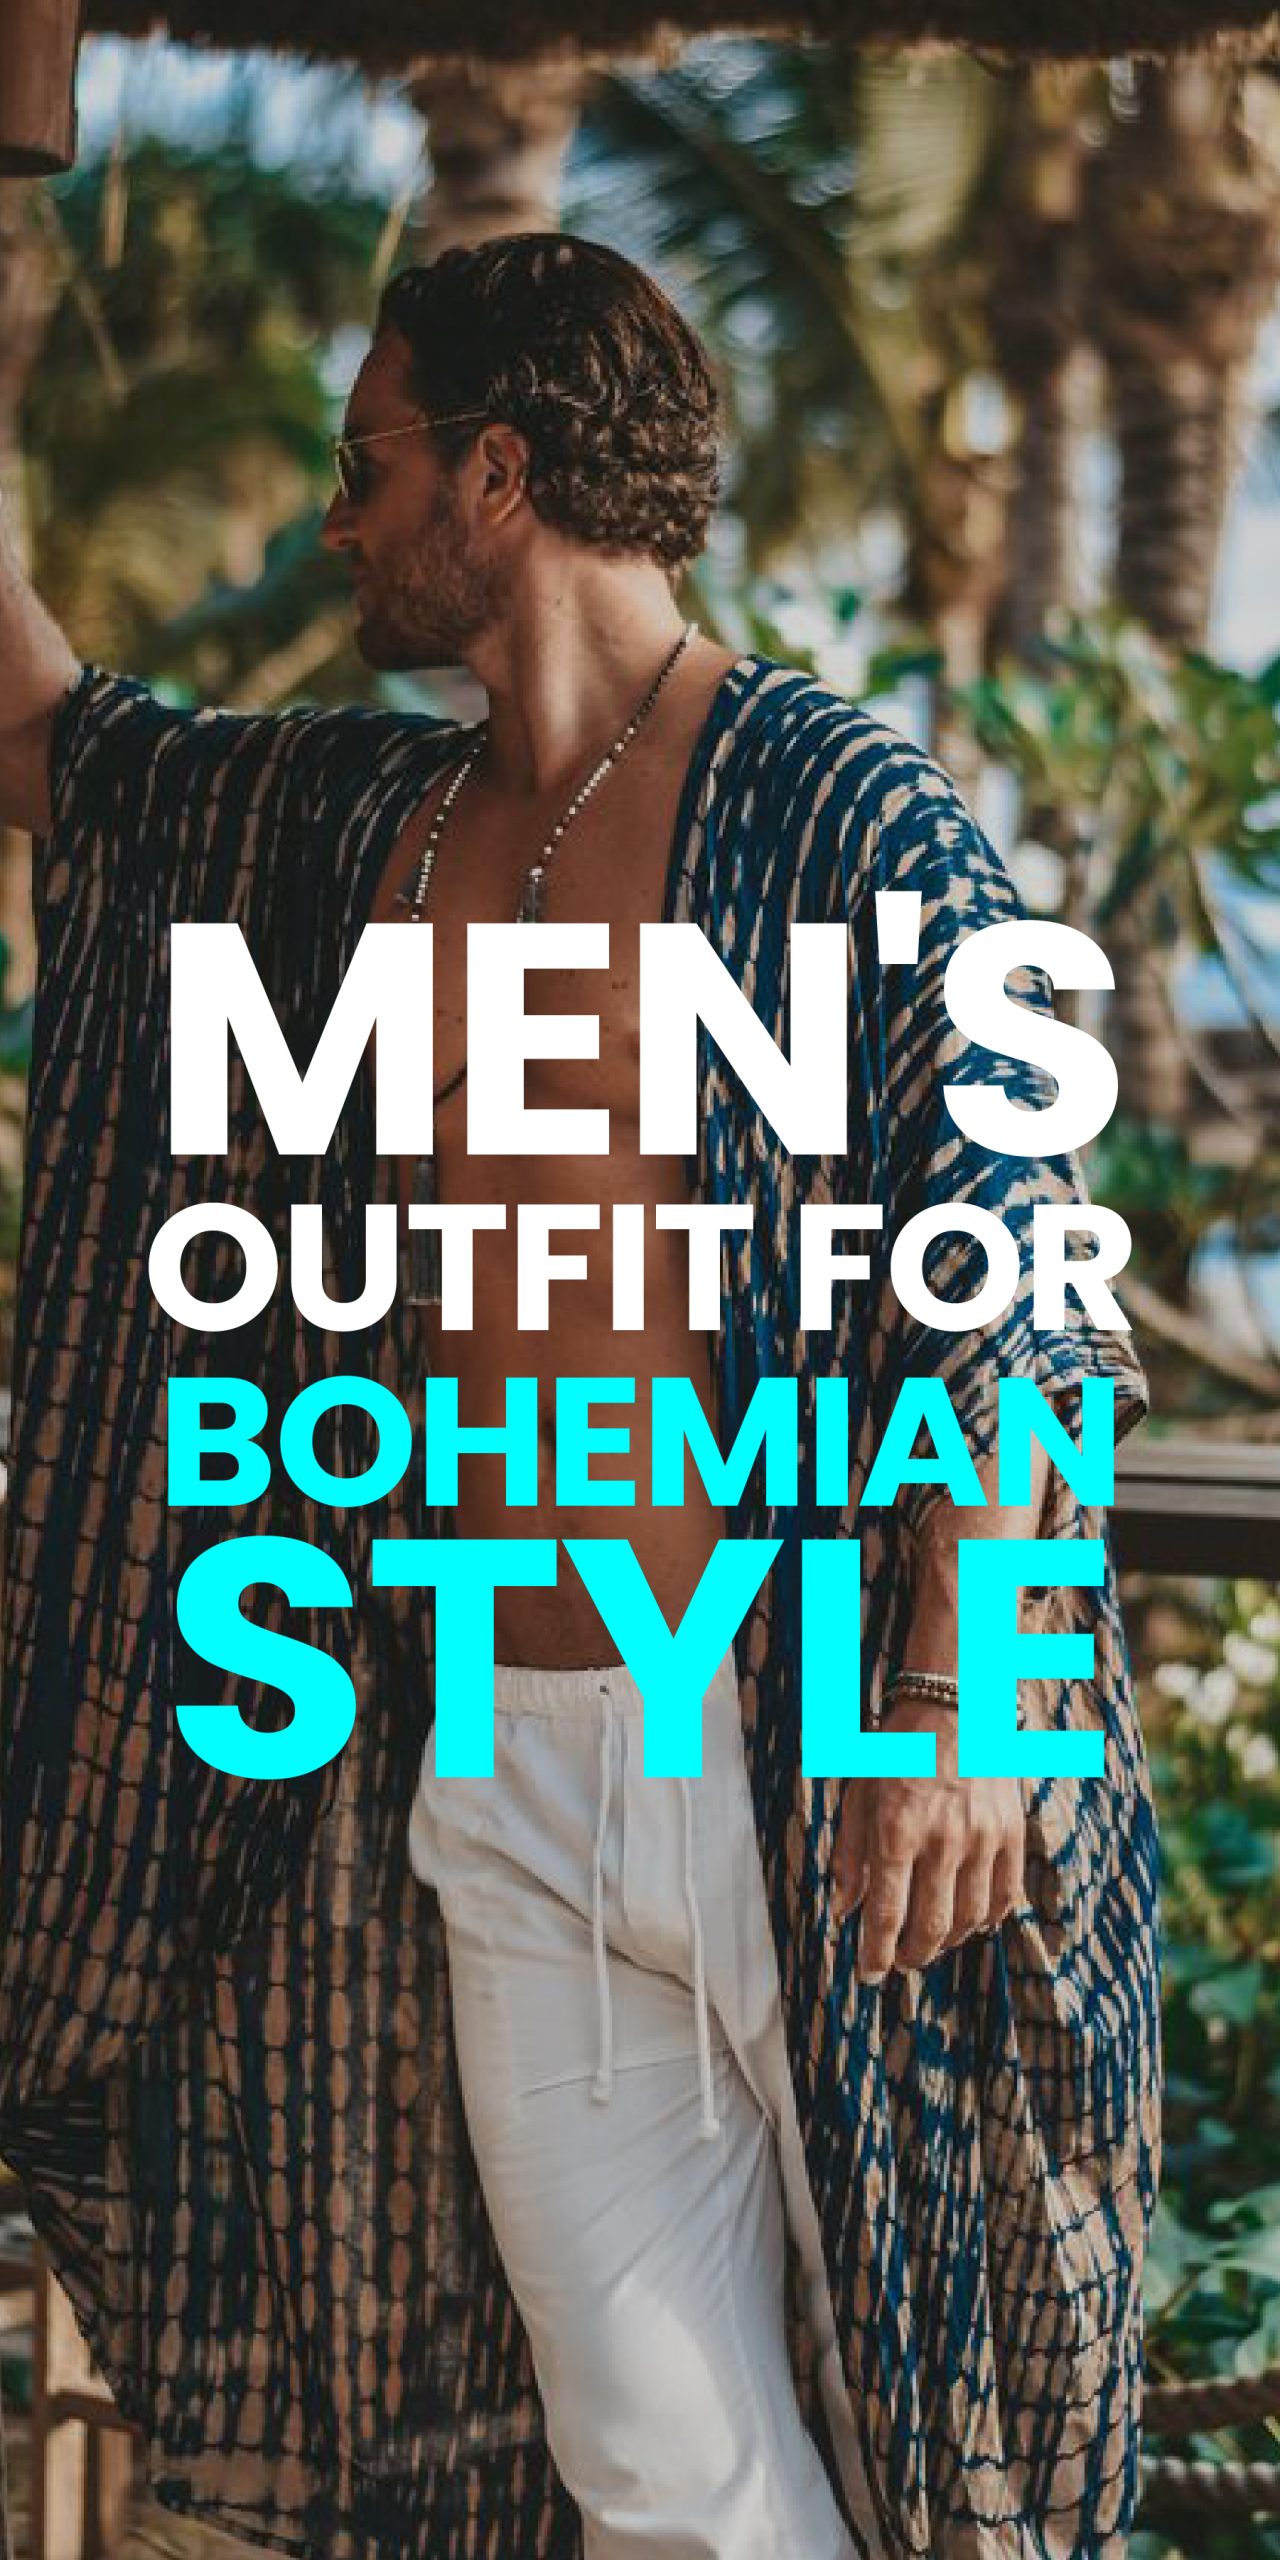 MEN’S OUTFIT GOR BOHEMIAN STYLE